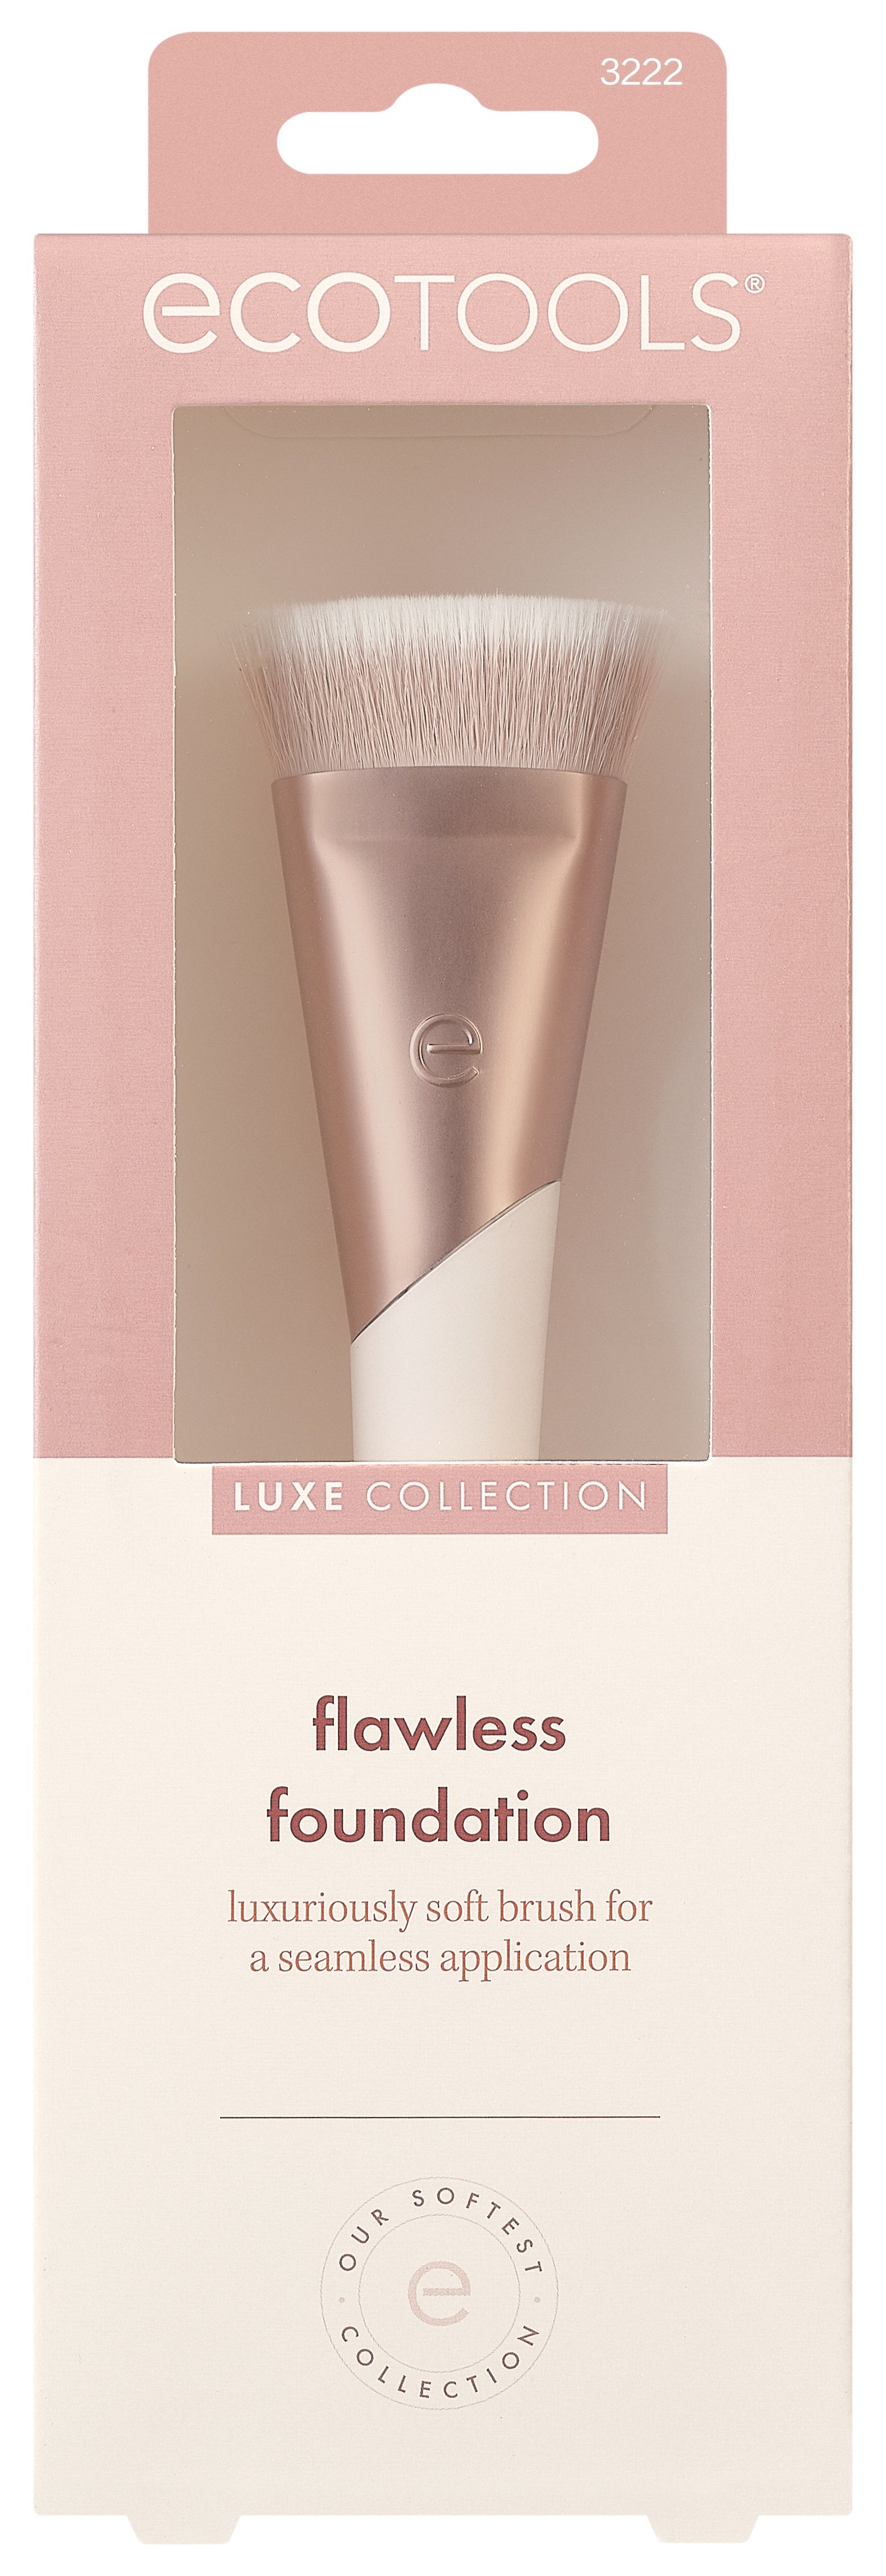 EcoTools Luxe Flawless Foundation Makeup Brush 1 st